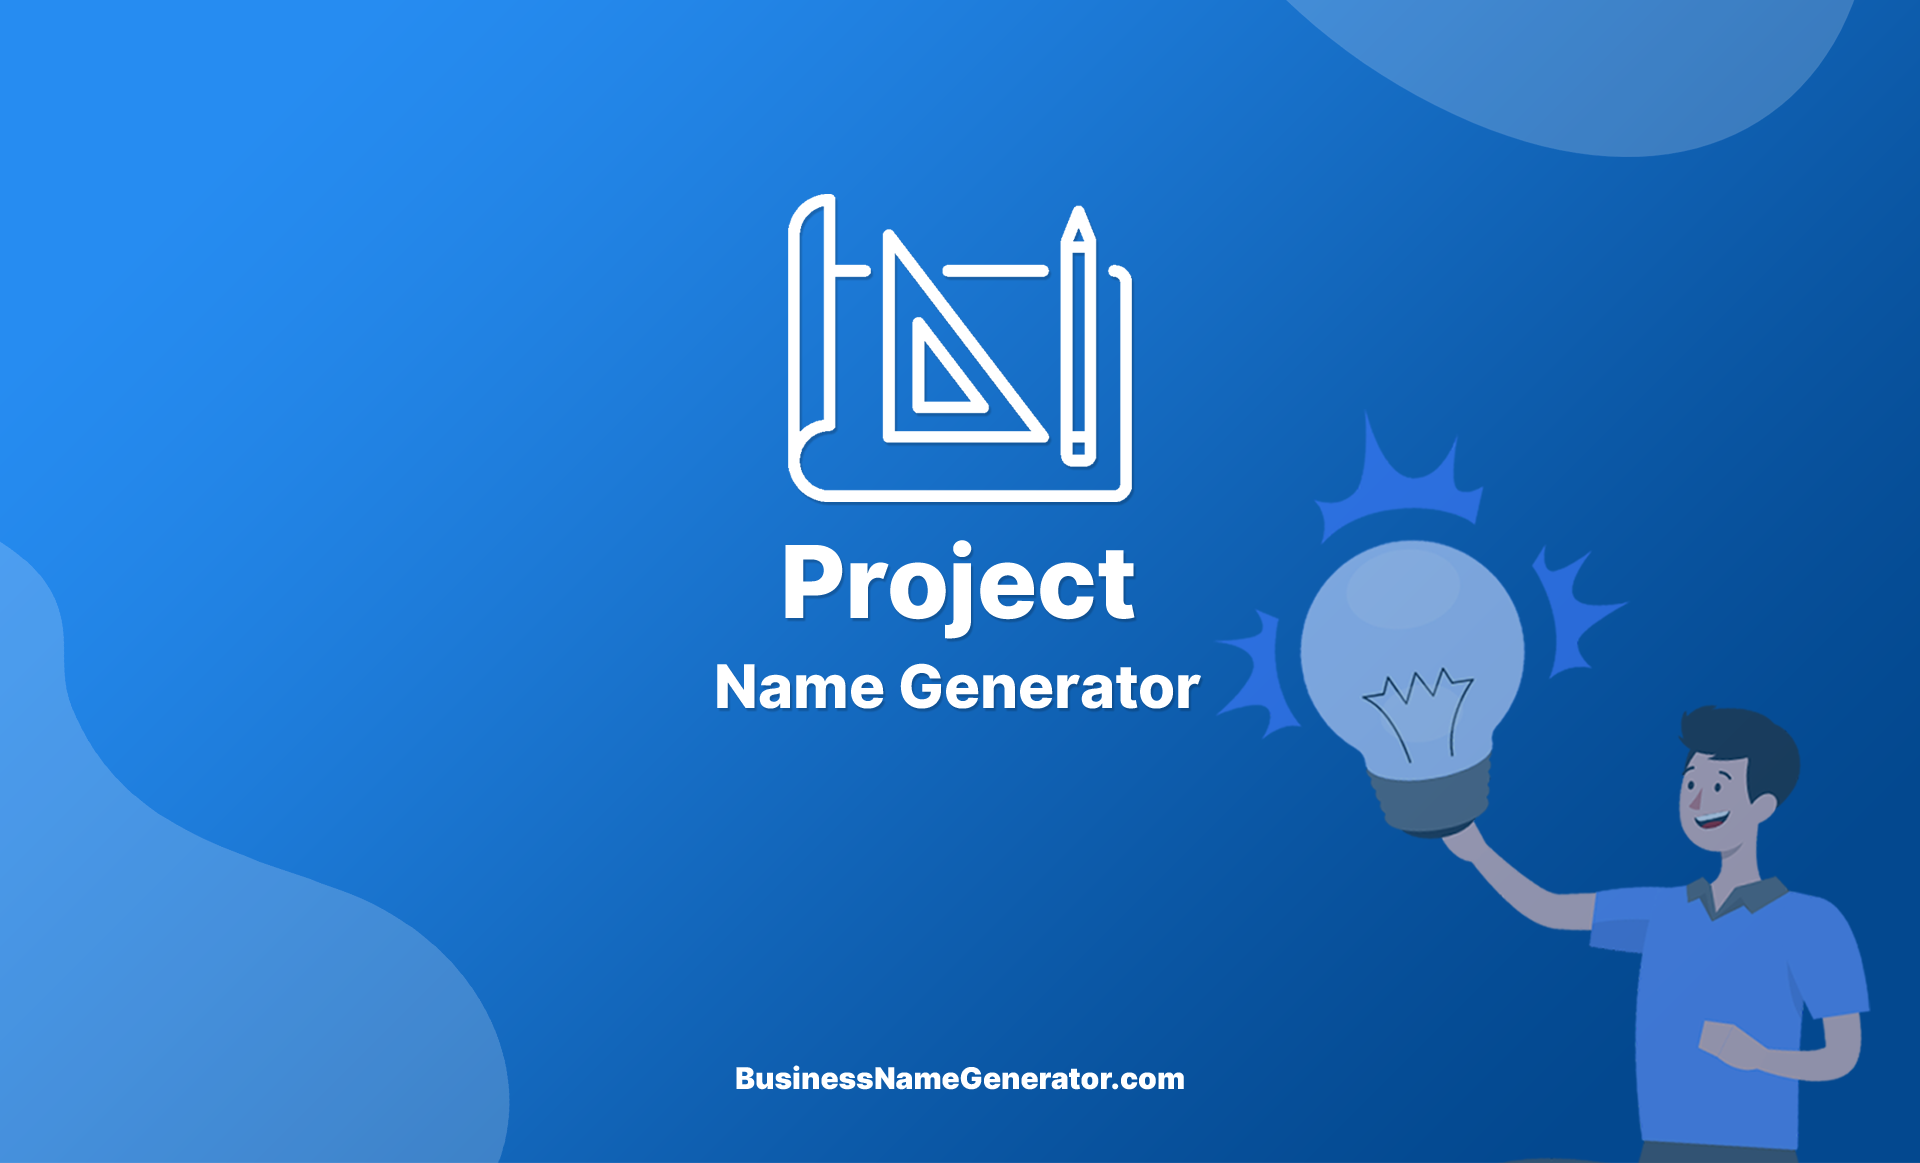 Project Name Generator